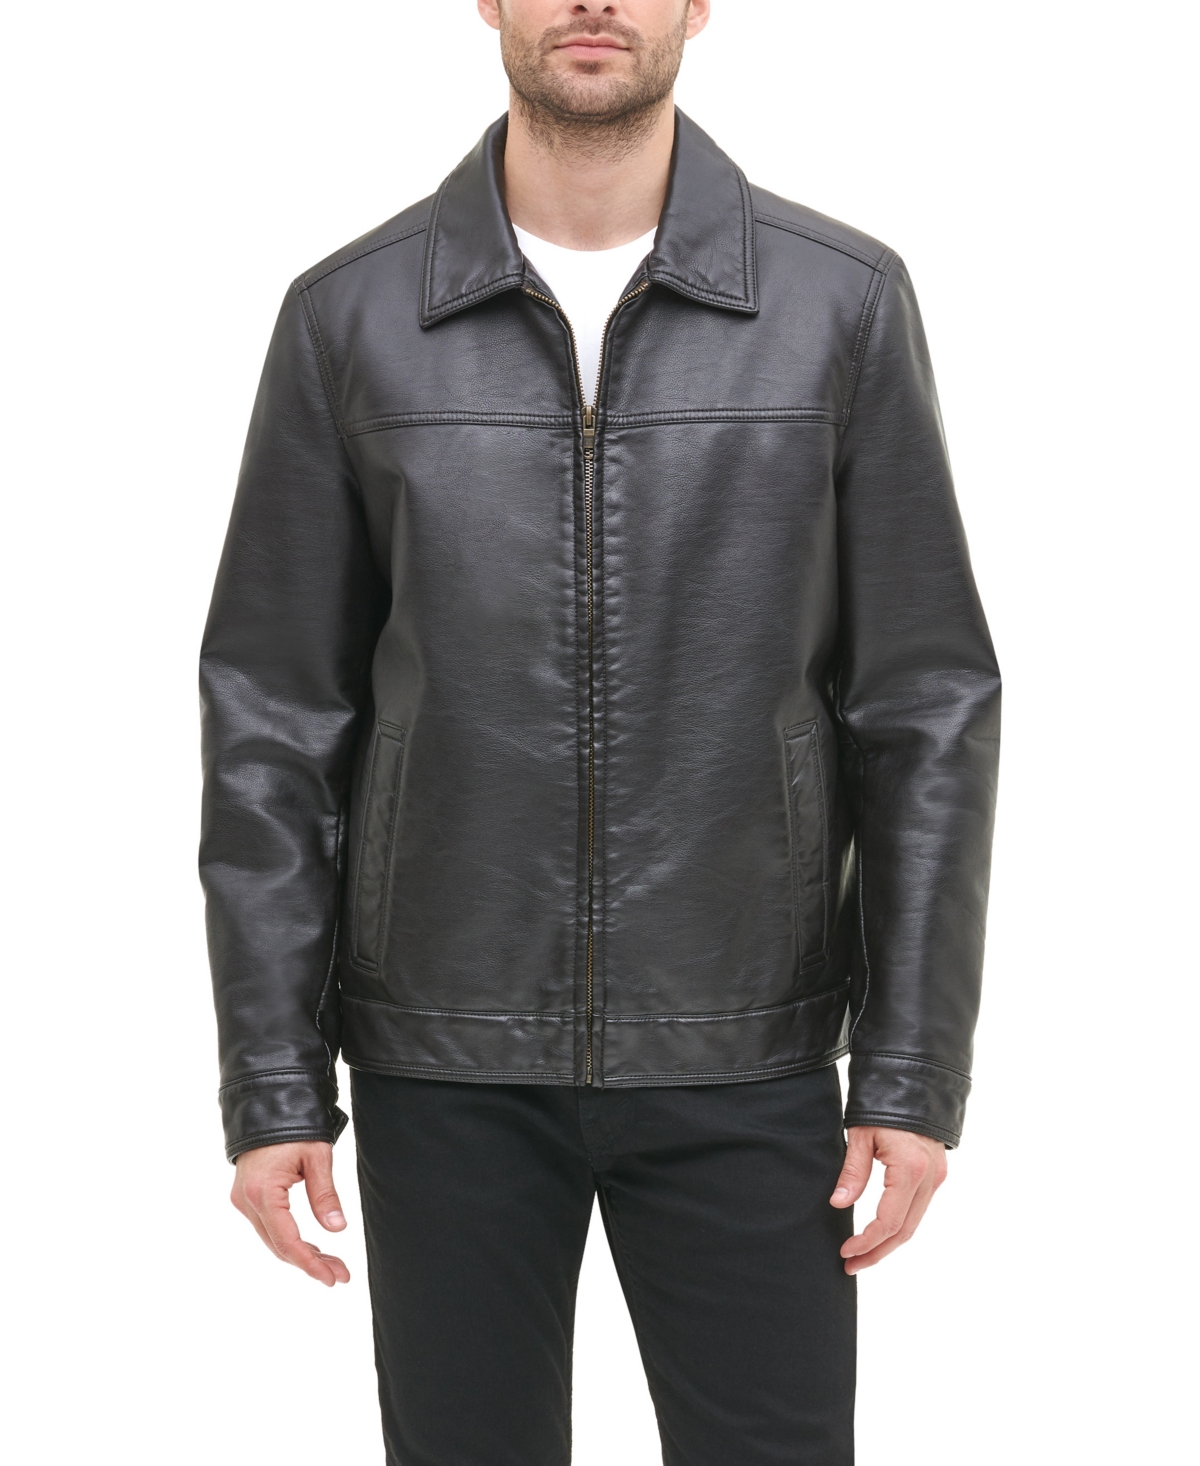 Tommy Hilfiger Men's Faux Leather Laydown Collar Jacket